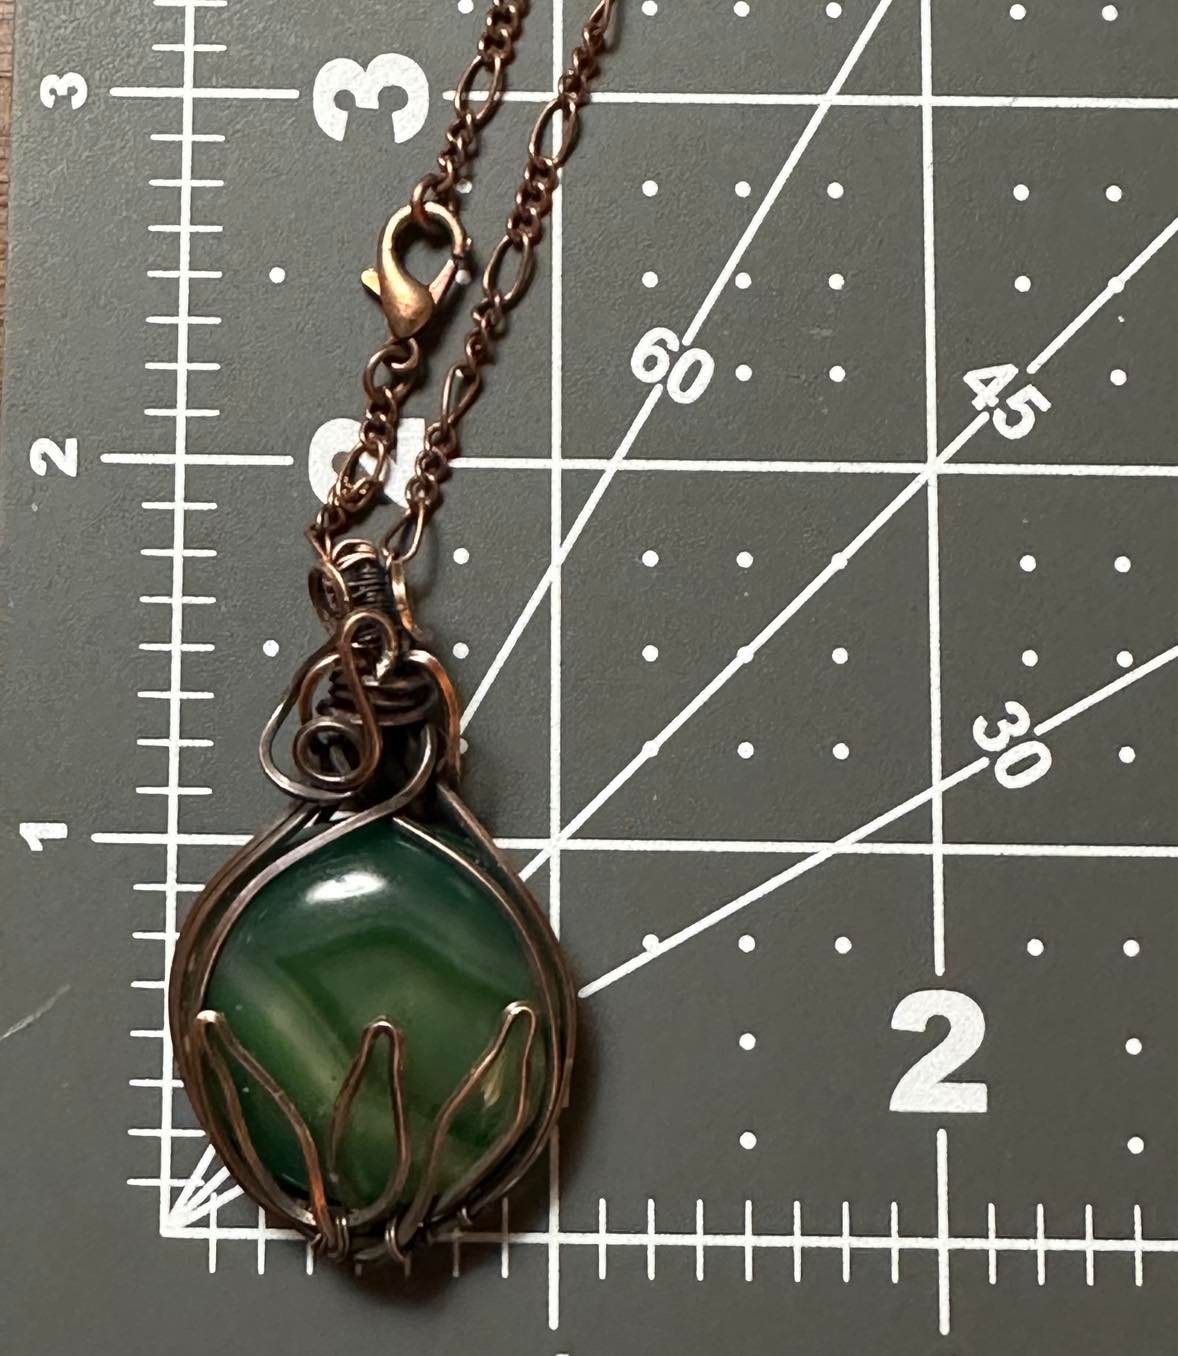 Round Green Veins Agate With Lotus Design Handmade Wire Wrapped Pendant